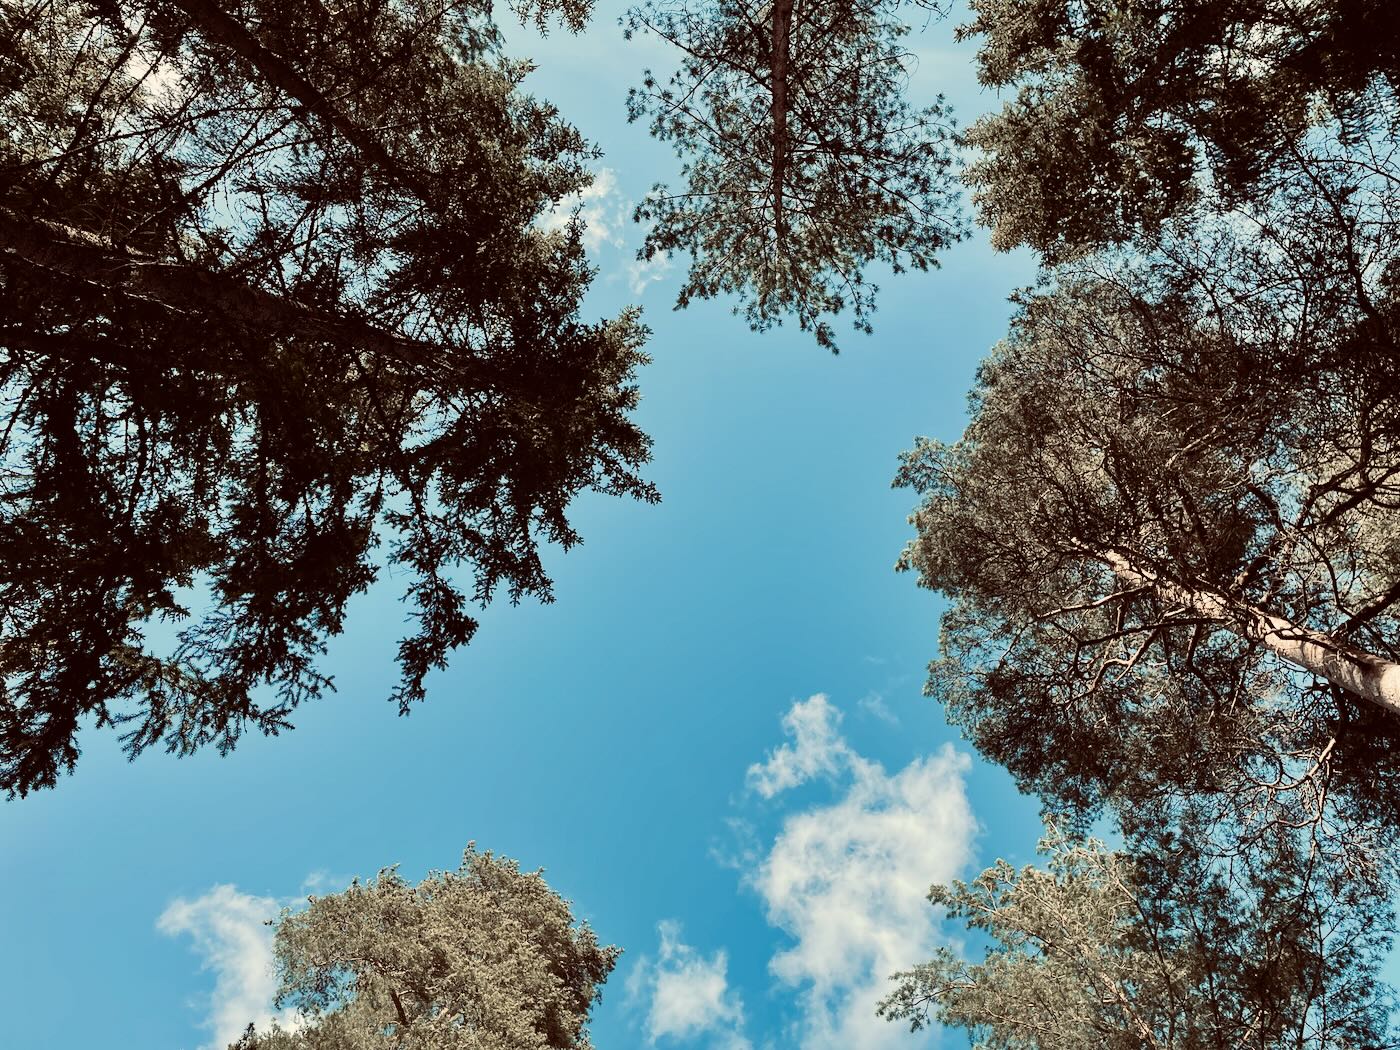 A blue sky with a few cumulus clouds framed by pine trees. Shot from the ground, straight up.